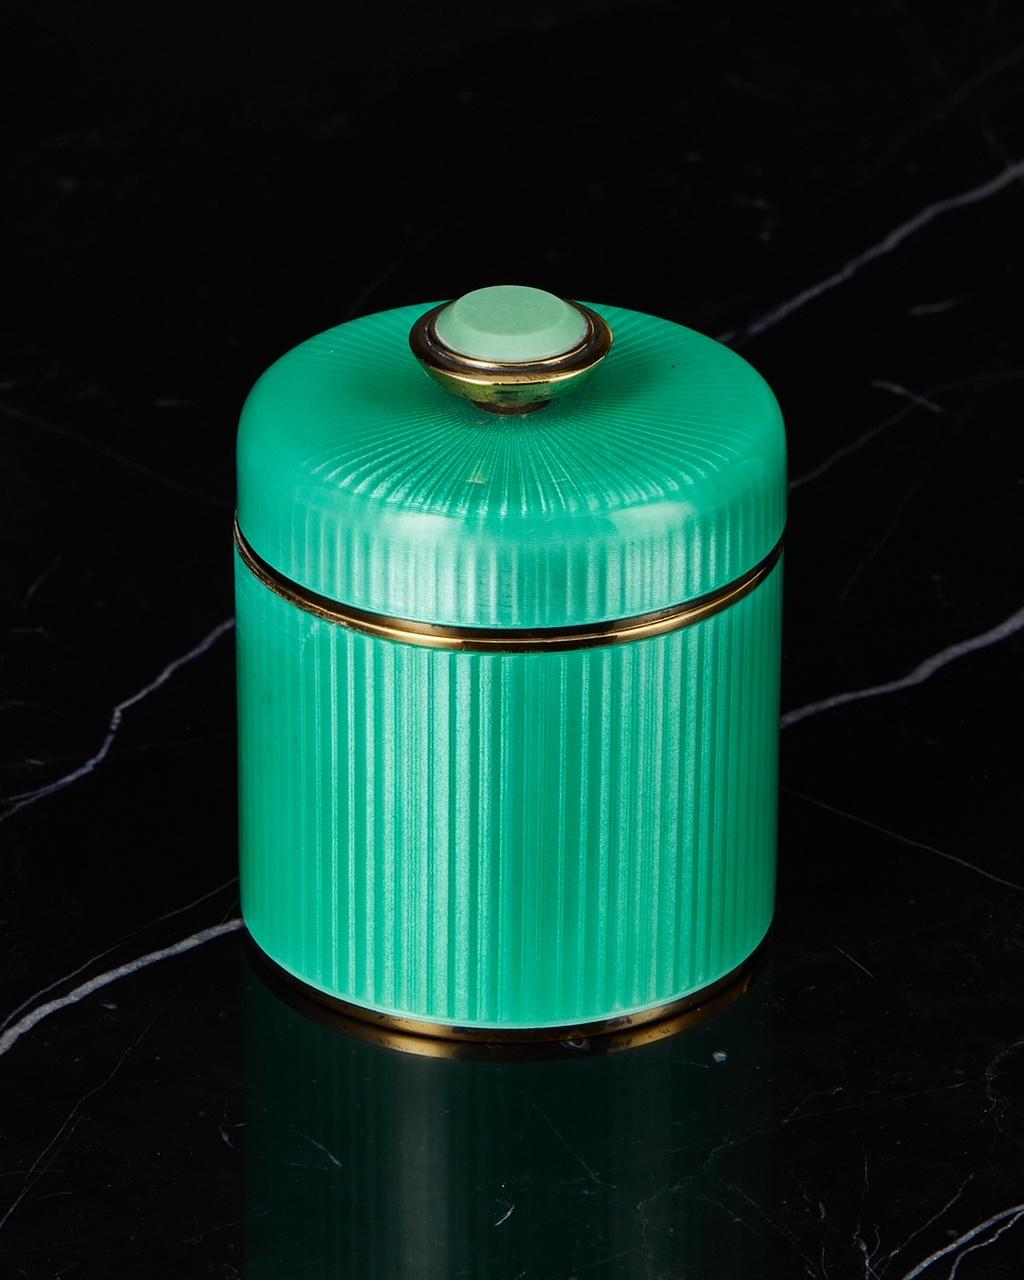 A wonderful 20th Century David Andersen Silver & Guilloche Enamel box with Lid Circa 1960.

A beautiful object in excellent condition. The translucent green enamel is of the highest quality and the lid flawlessly sits in position to give overall